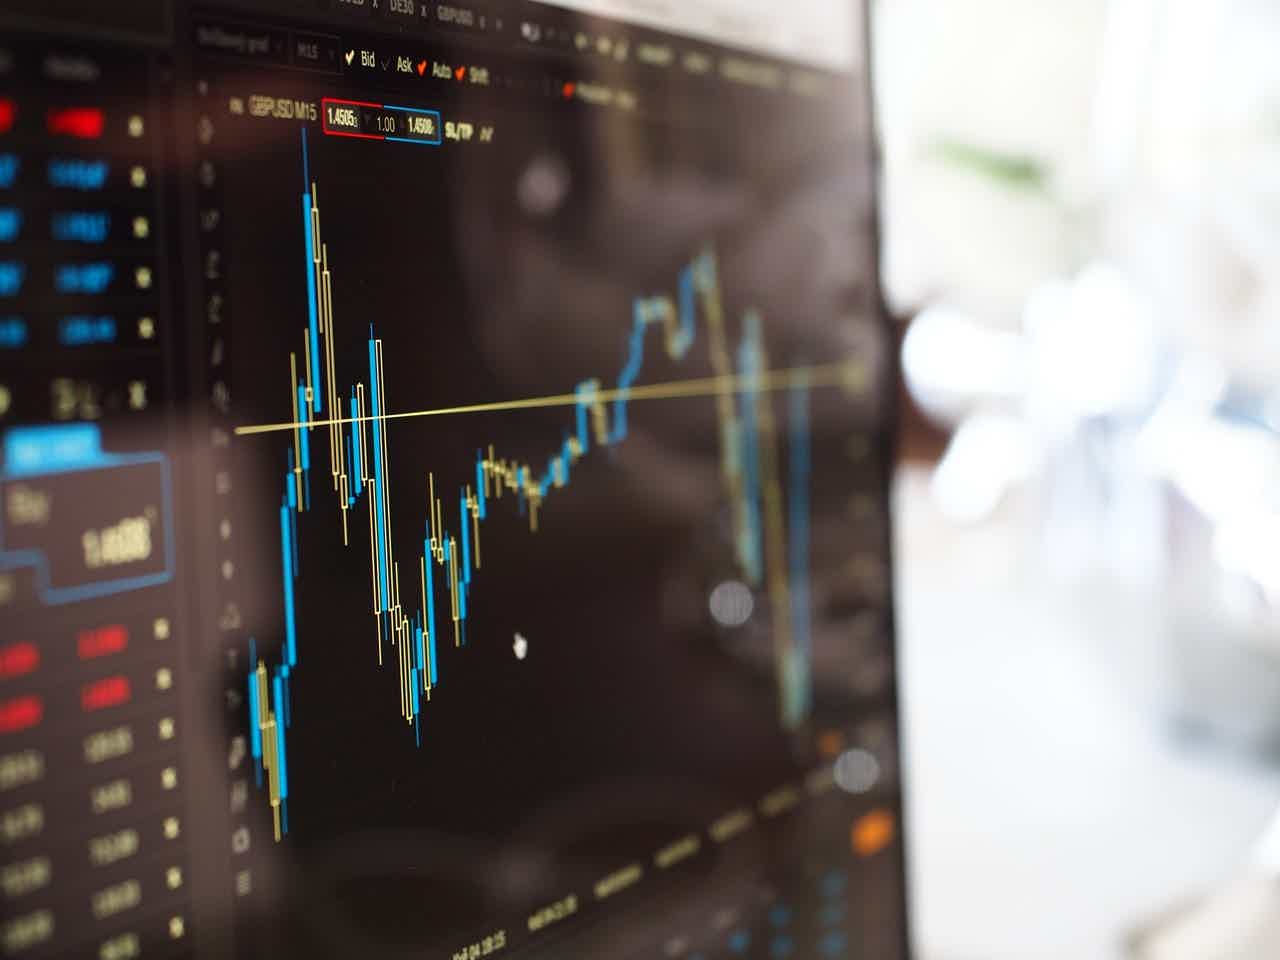 Find out what a point means in the stock market! Source: Pexels